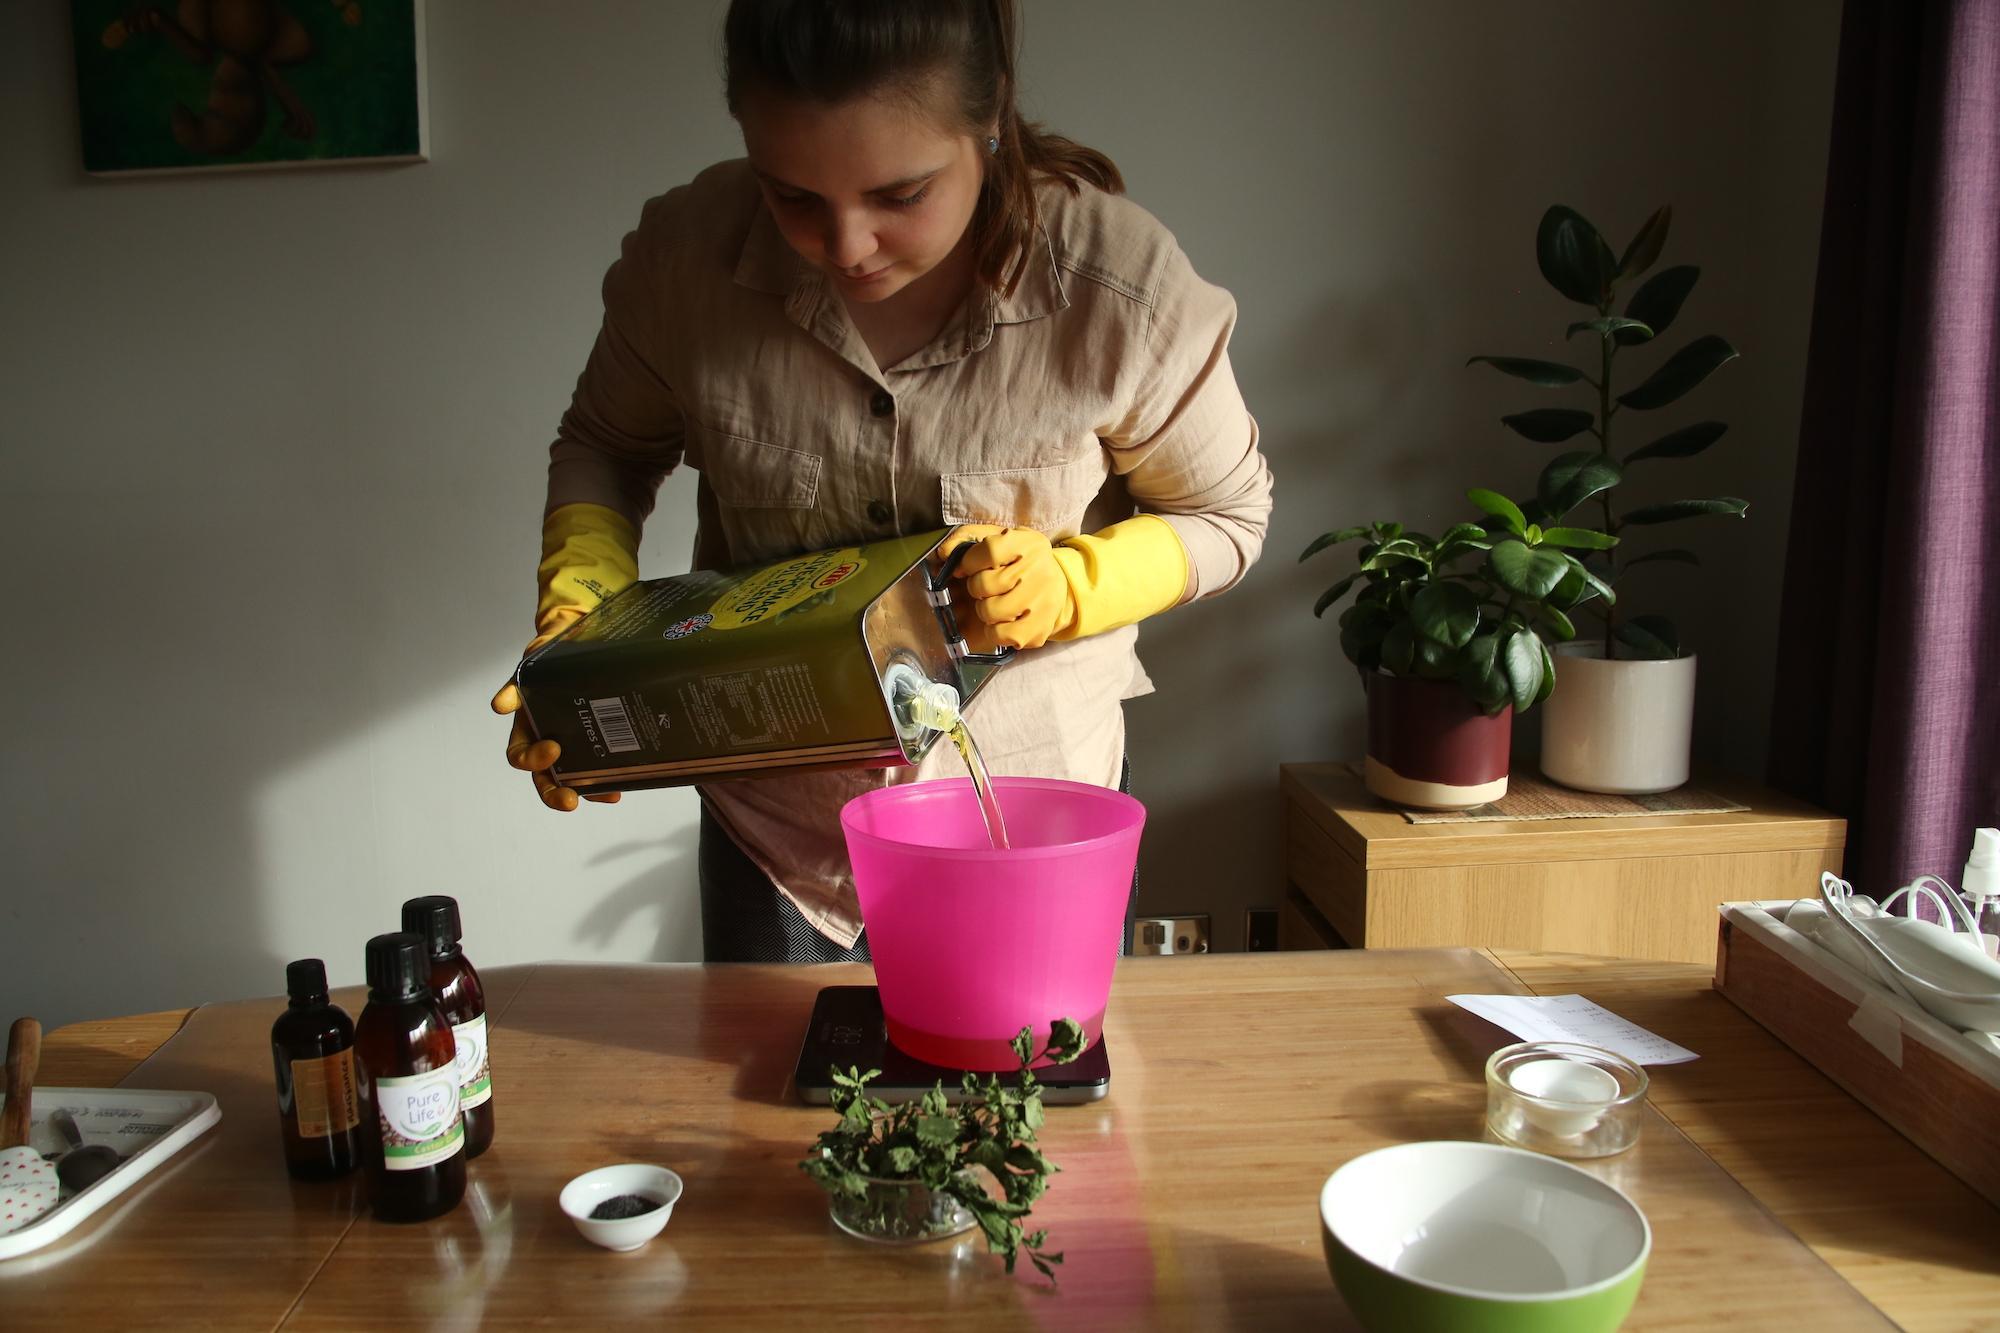 Nadia pouring soap ingredients into a bowl